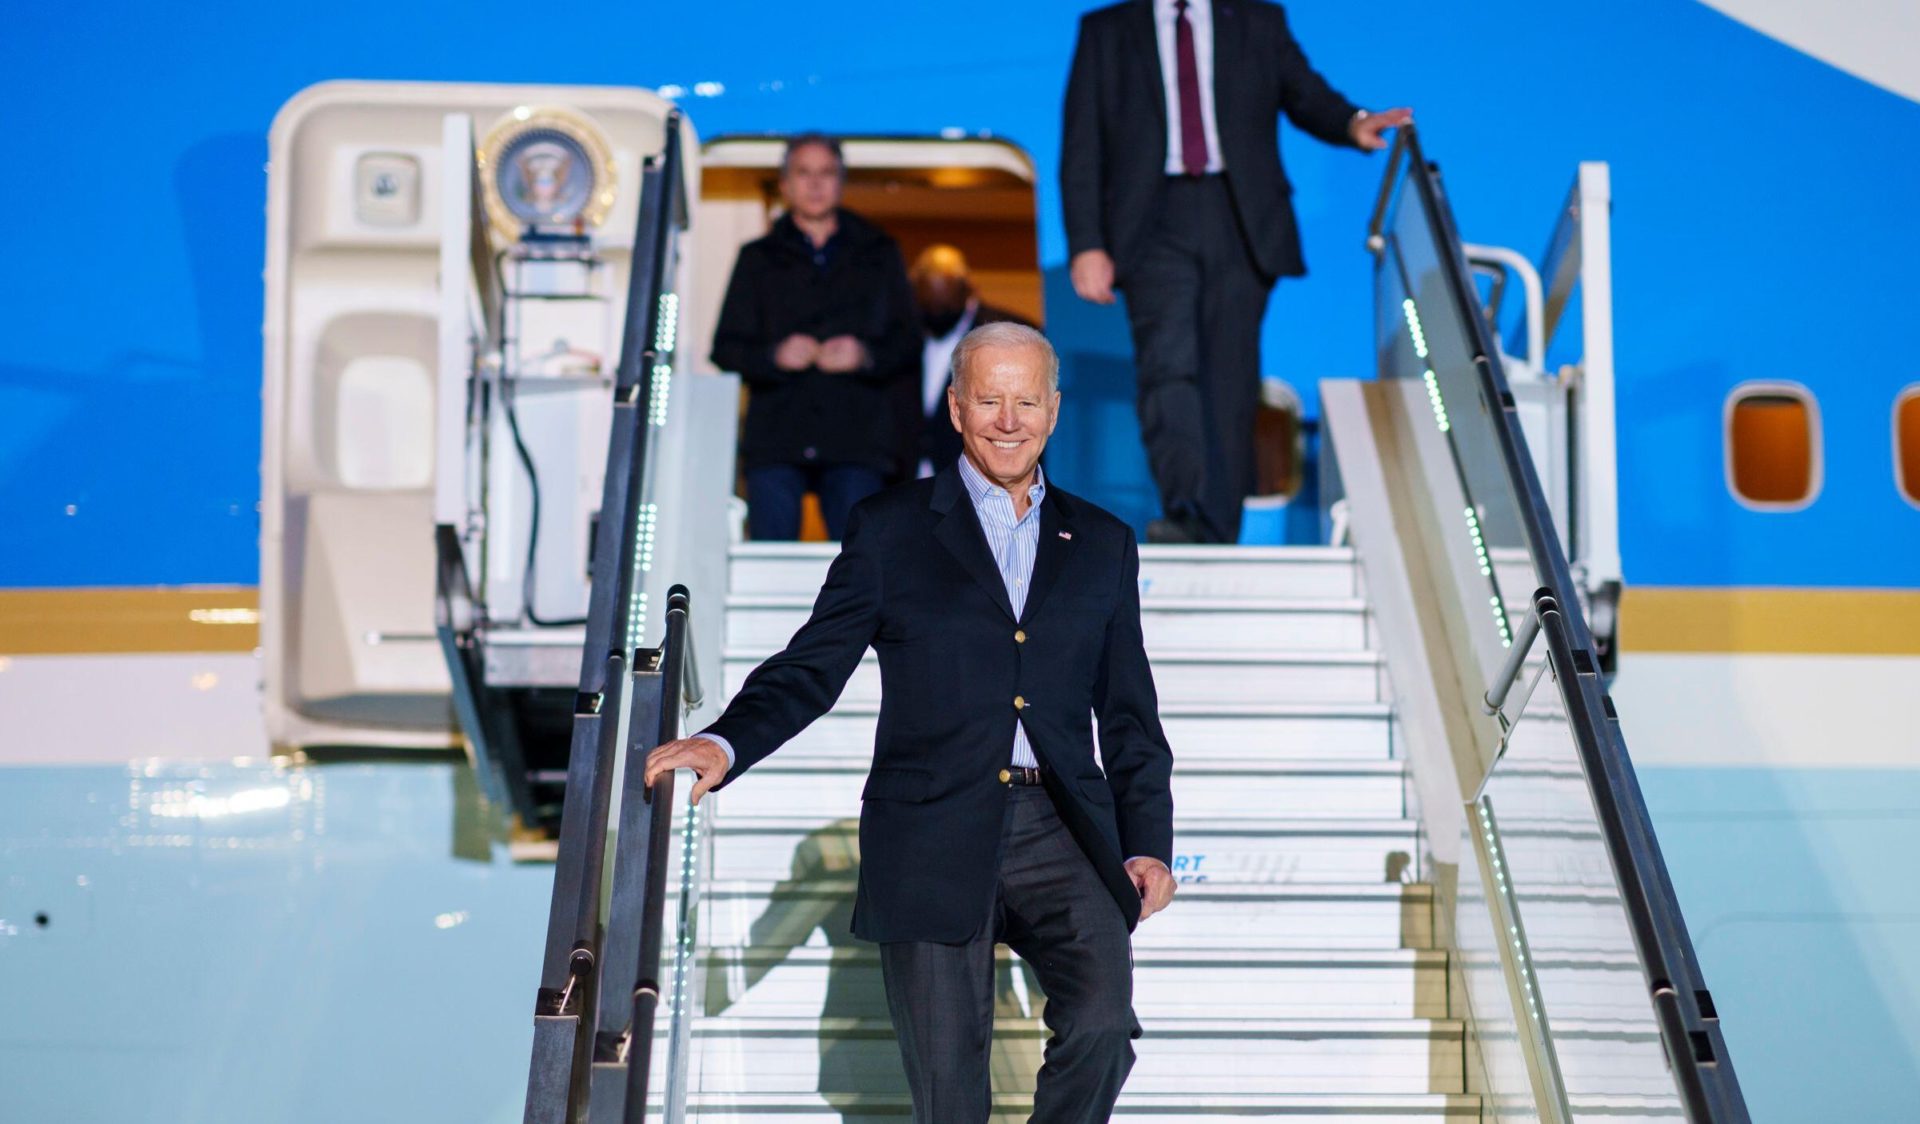 US President Joe Biden disembarks Air Force One at Warsaw Chopin International Airport in Poland in March 2022